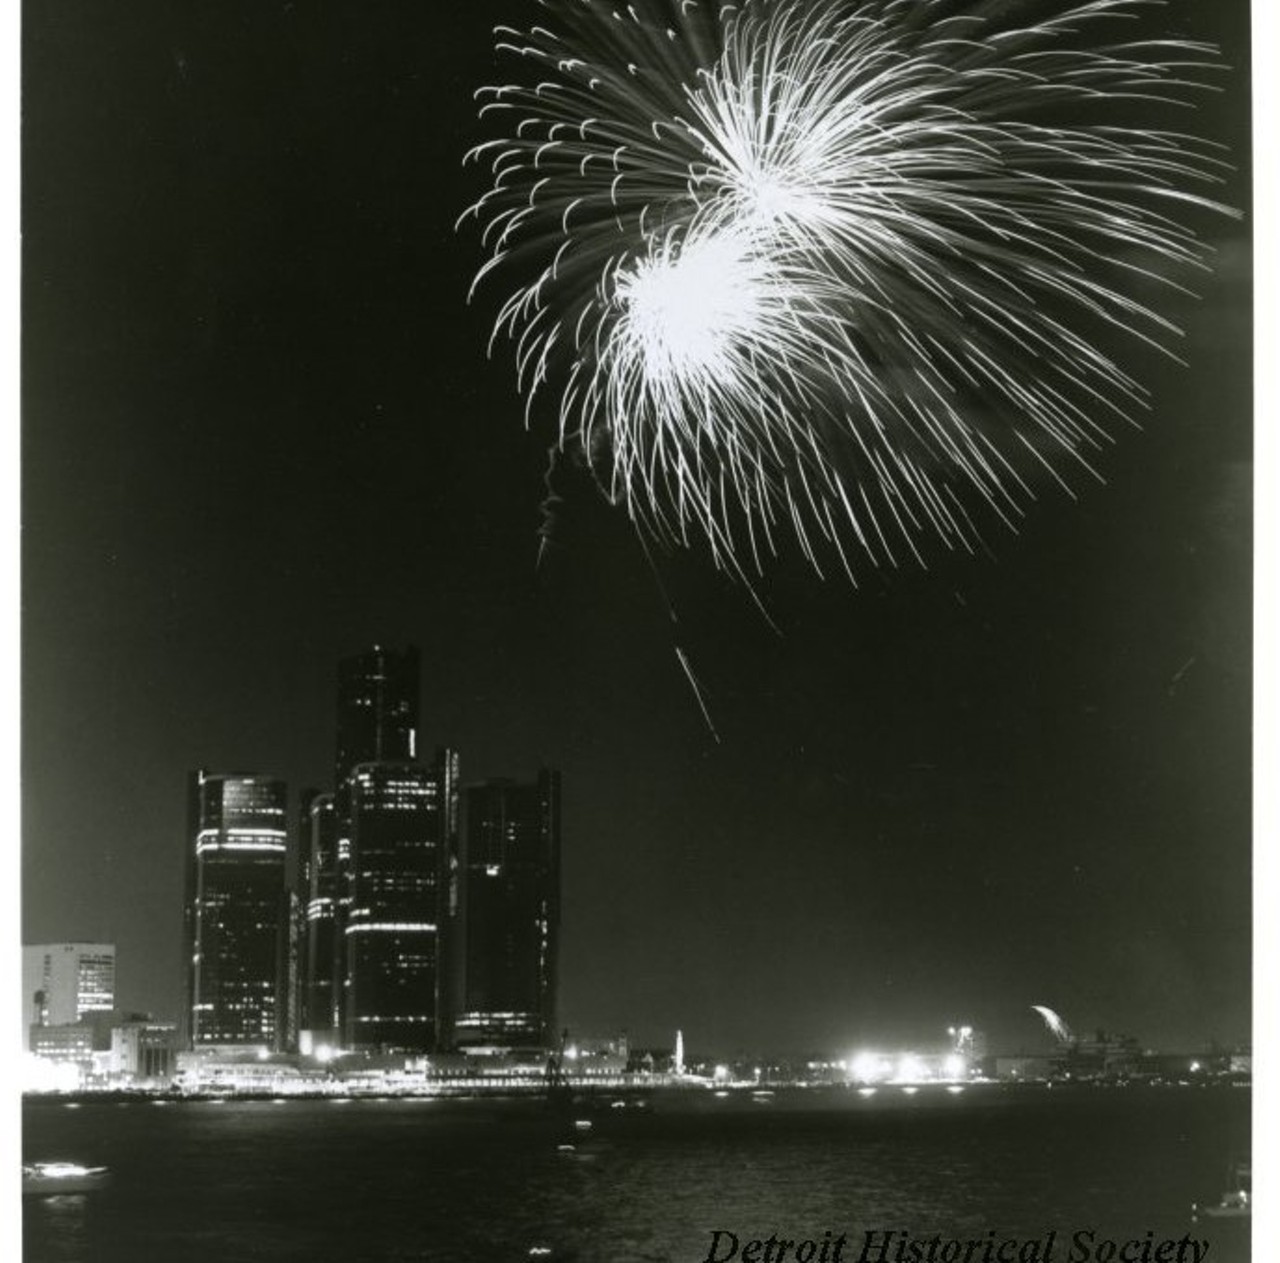 "Black and white photographic print depicting a fireworks display over the Detroit River at night, with the Renaissance Center and Blue Cross Blue Shield Building in the background.
Caption #1 reads- The Hudson's-Stroh's fireworks extravaganza will again be the "crowning jewel" in the events planned for the Detroit-Windsor International Freedom Festival, June 30 - July 4. This year's fireworks display will begin downtown at dusk on June 30 and will conclude after several tons of colorful starbursts have been shot into the night sky from barges on the Detroit River. In case of bad weather, everything will be rescheduled for July 1. The fireworks is only one of over 75 Festival events.
Caption #2 reads- For release on or after Tuesday, June 5, 1979. Detroit River "lights up" June 29 - For the 21st consecutive year, the spectacular Freedom Festival Fireworks will herald the opening of Detroit and Windsor's annual celebration. This year's fireworks display will begin at 9:55 p.m., Friday, June 29, from barges anchored midway in the Detroit River opposite the Veterans Memorial Building, Cobo Hall and Ford Auditorium. More than 600,000 people are expected to watch the seven tons of colorful starbursts light up the skylines of the two cities. In case of bad weather, everything will be rescheduled for Saturday, June 30."